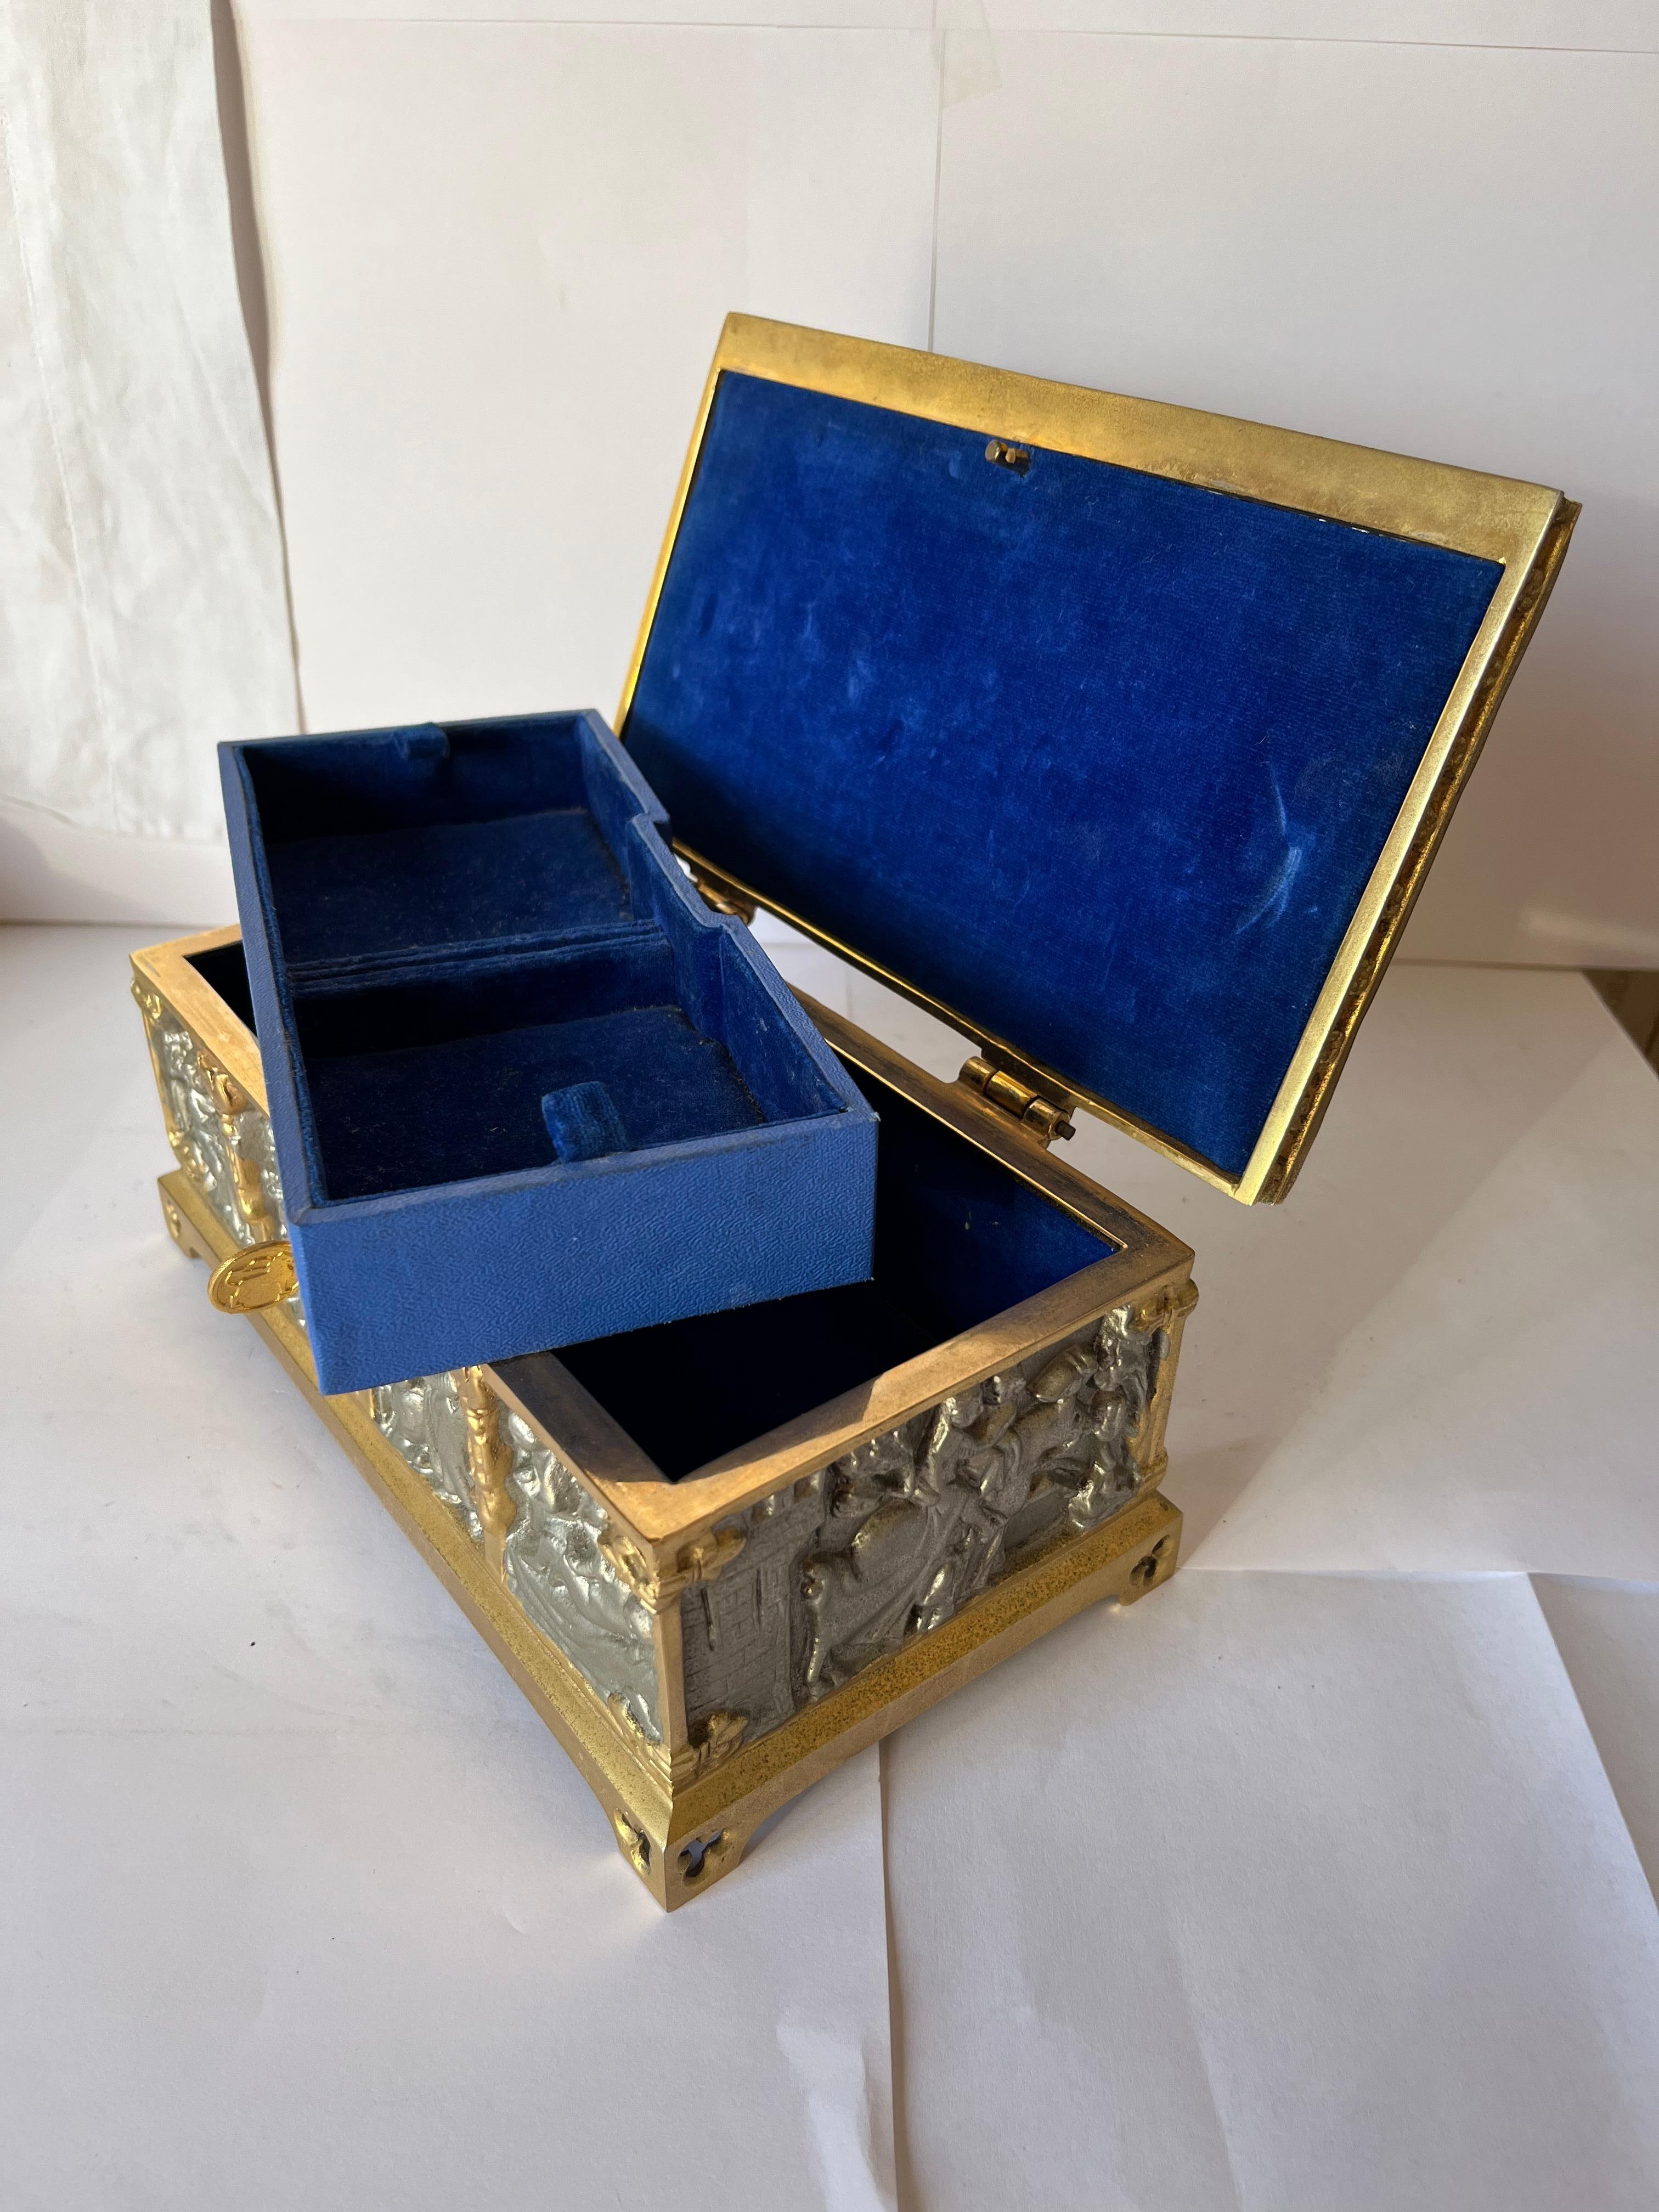 European Renaissance Style Jewelry Box Steel and Golden Steel  Key Blue Velvet In Good Condition For Sale In Miami, FL